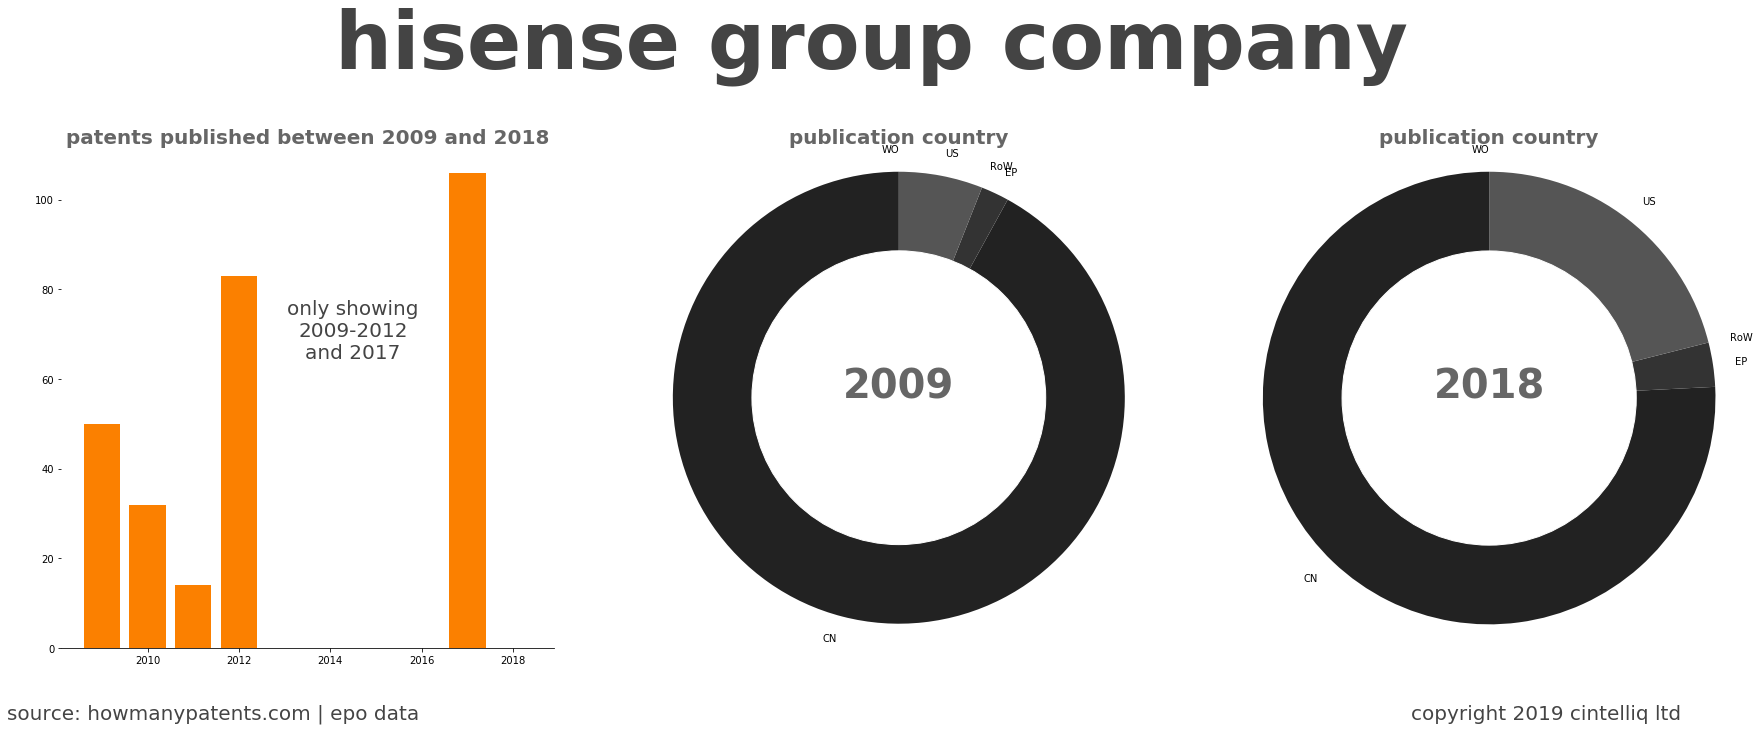 summary of patents for Hisense Group Company